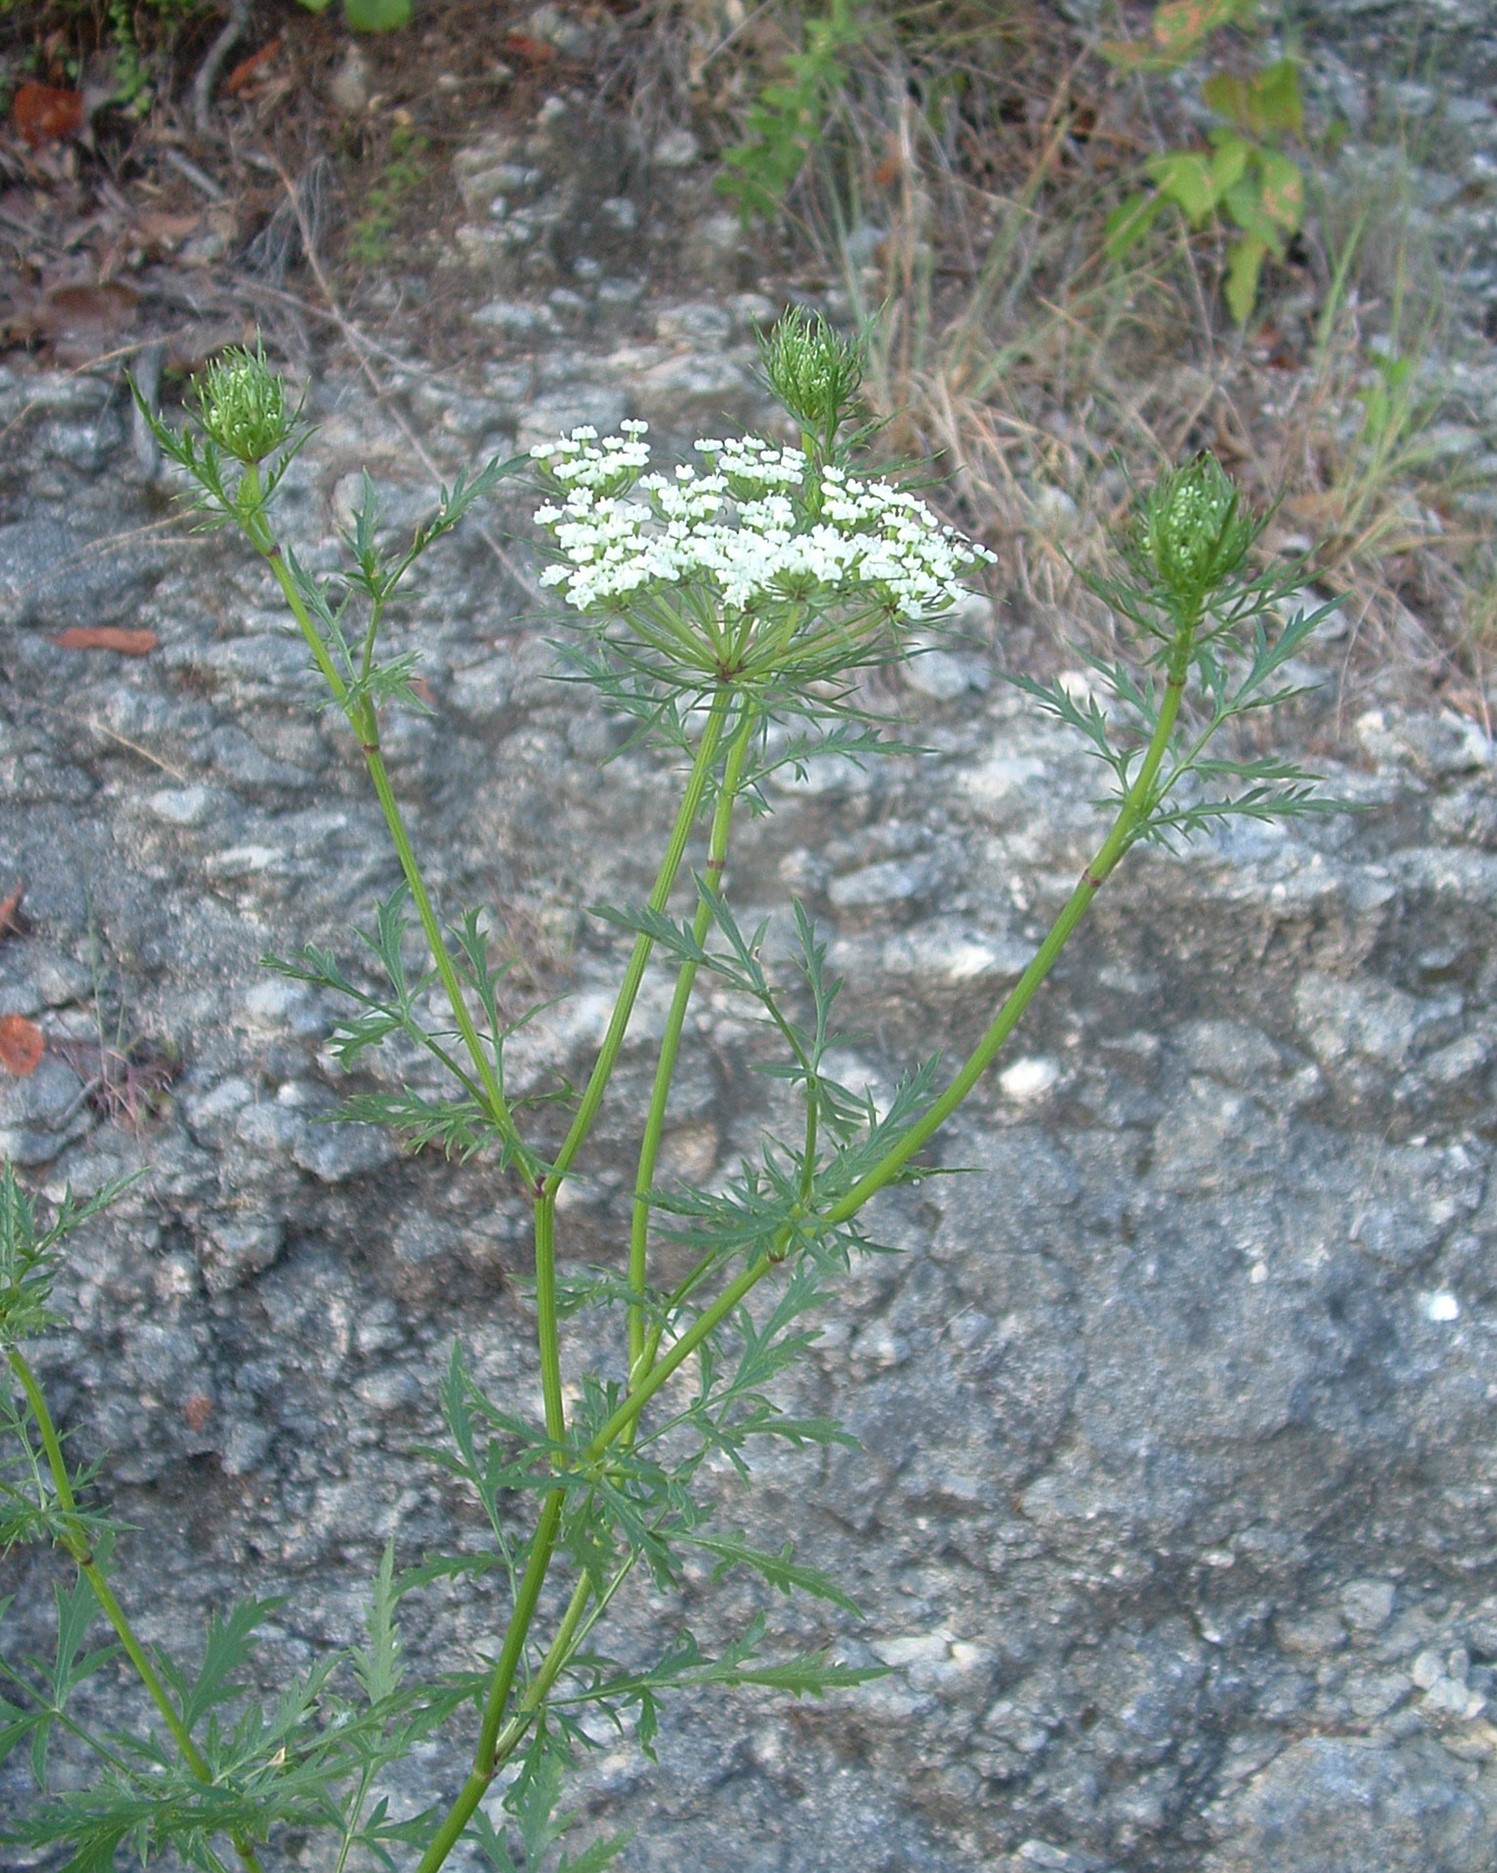 Close up of Daucosma laciniata in flower, with the white flowers within the umbel and the divided bracts.